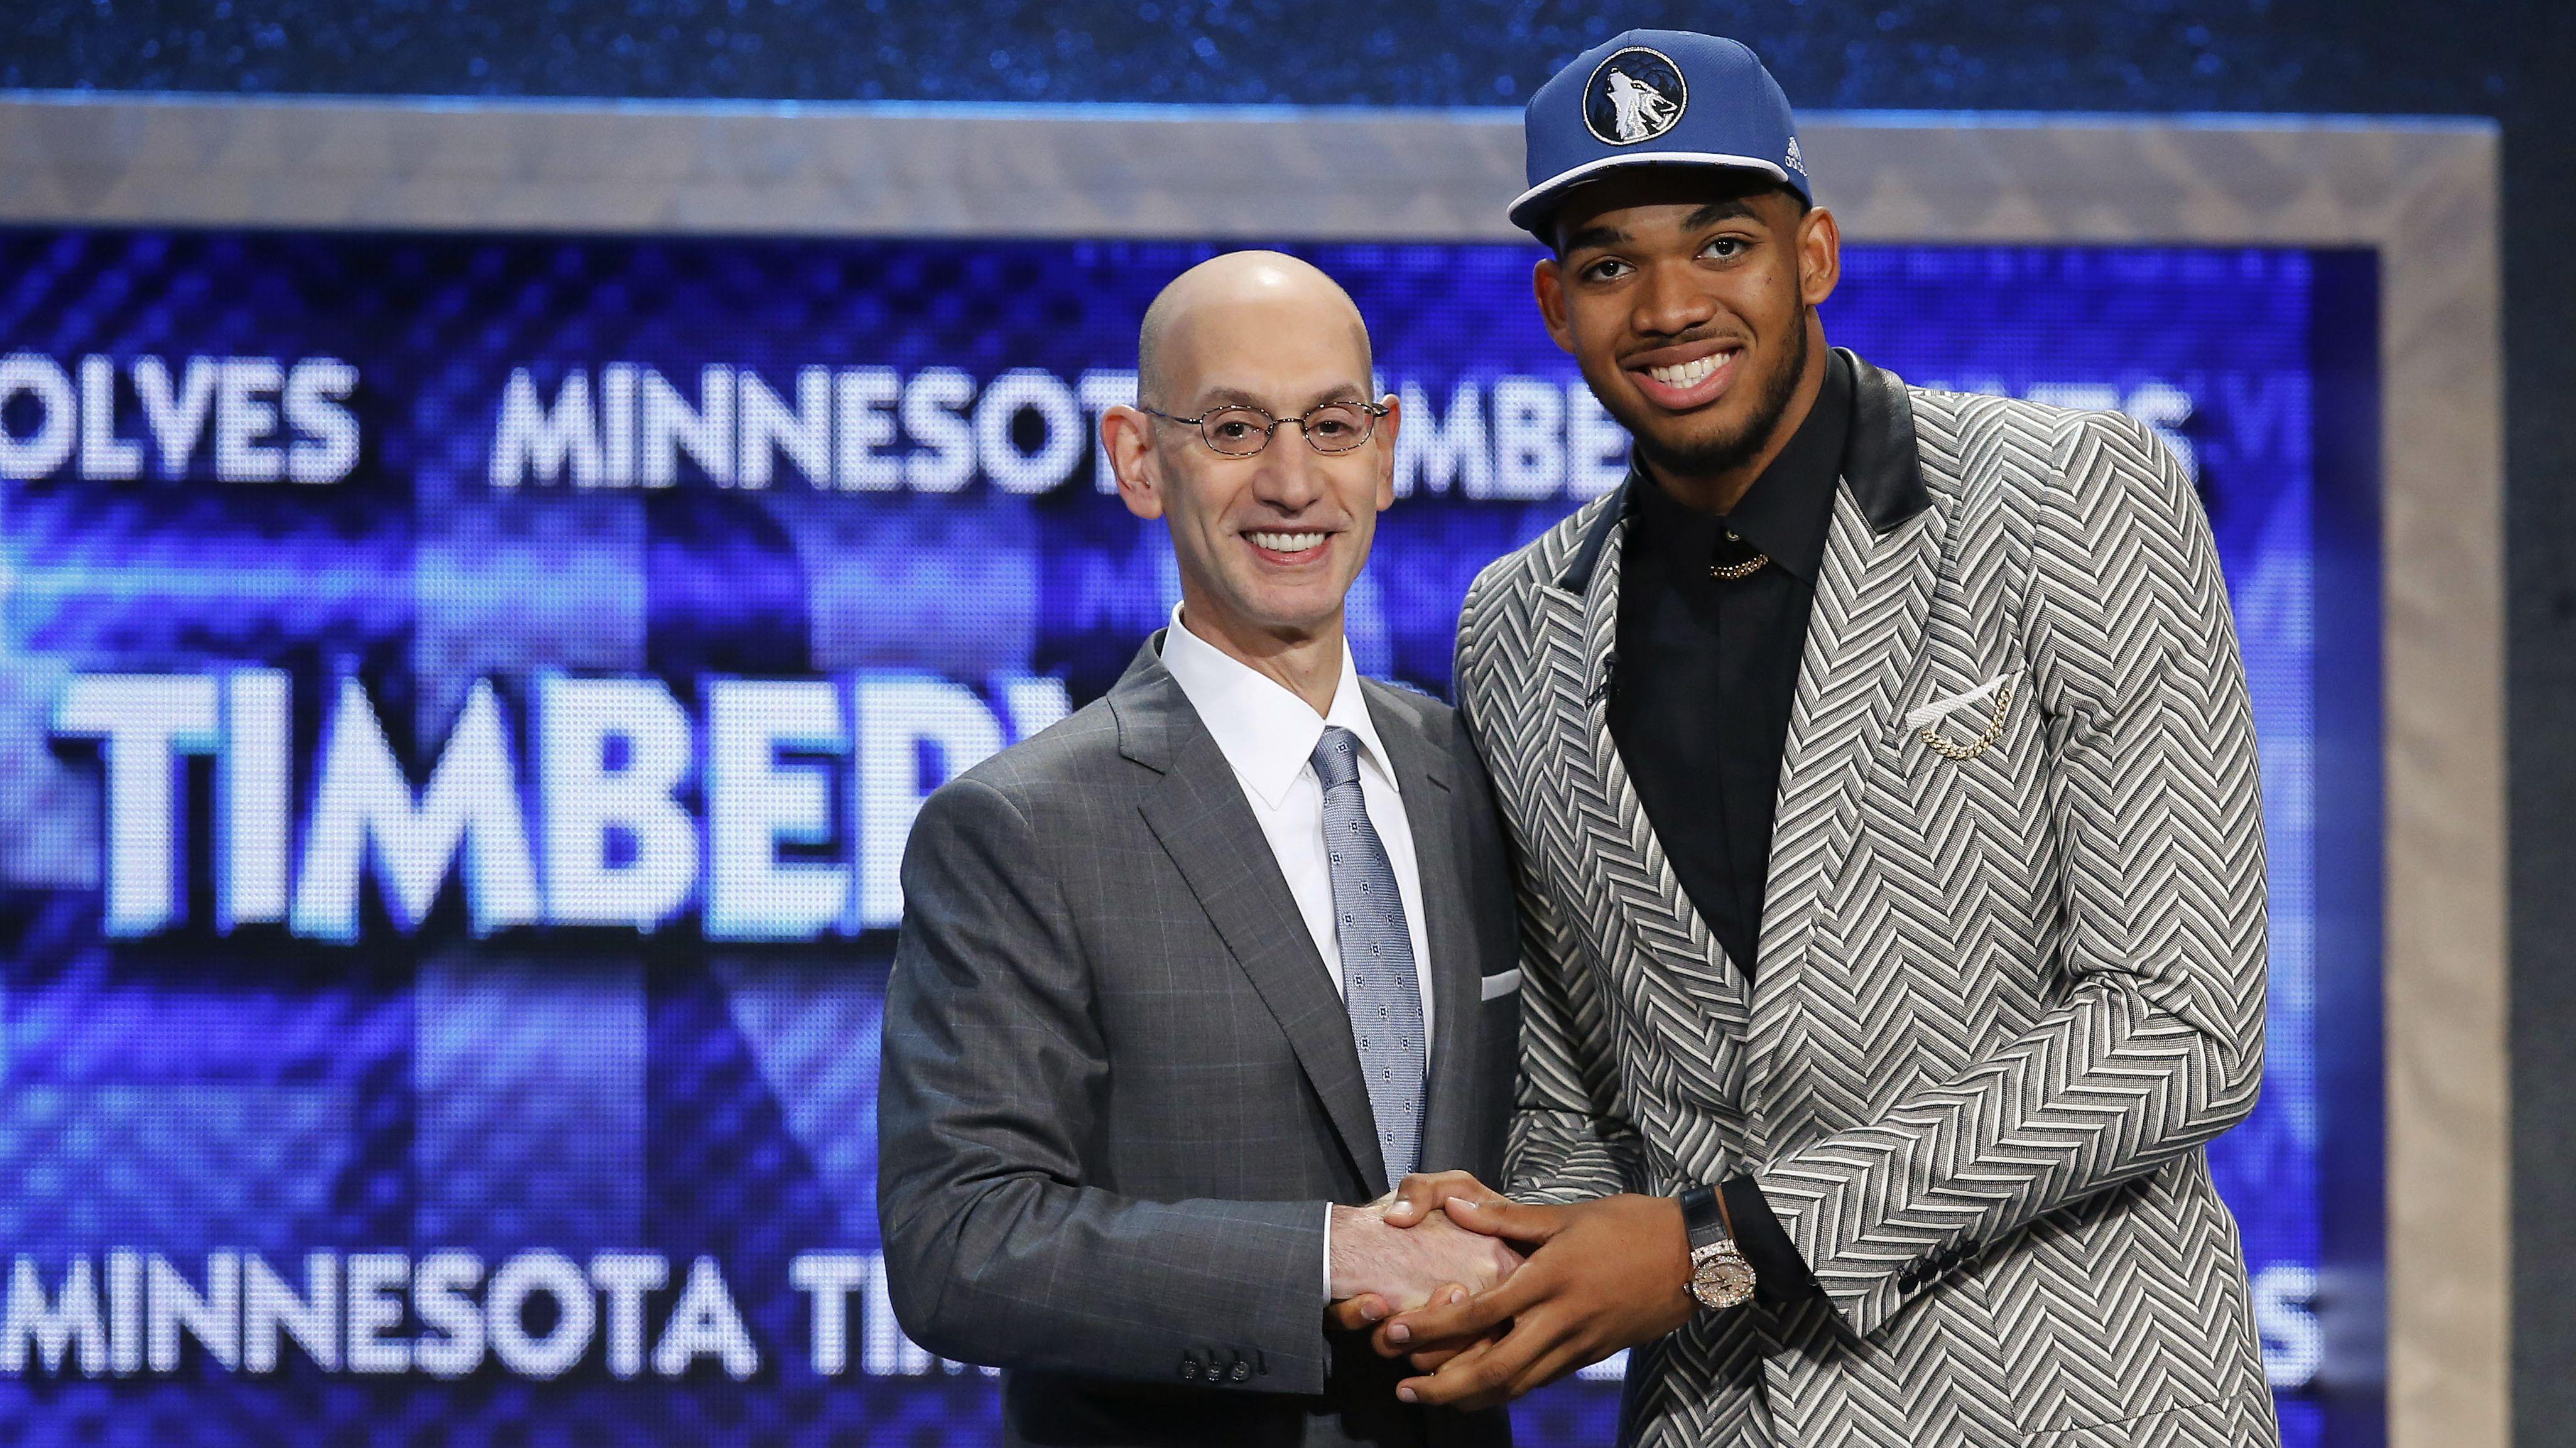 Kentucky's Karl Anthony Towns Is No. 1 NBA Draft Pick